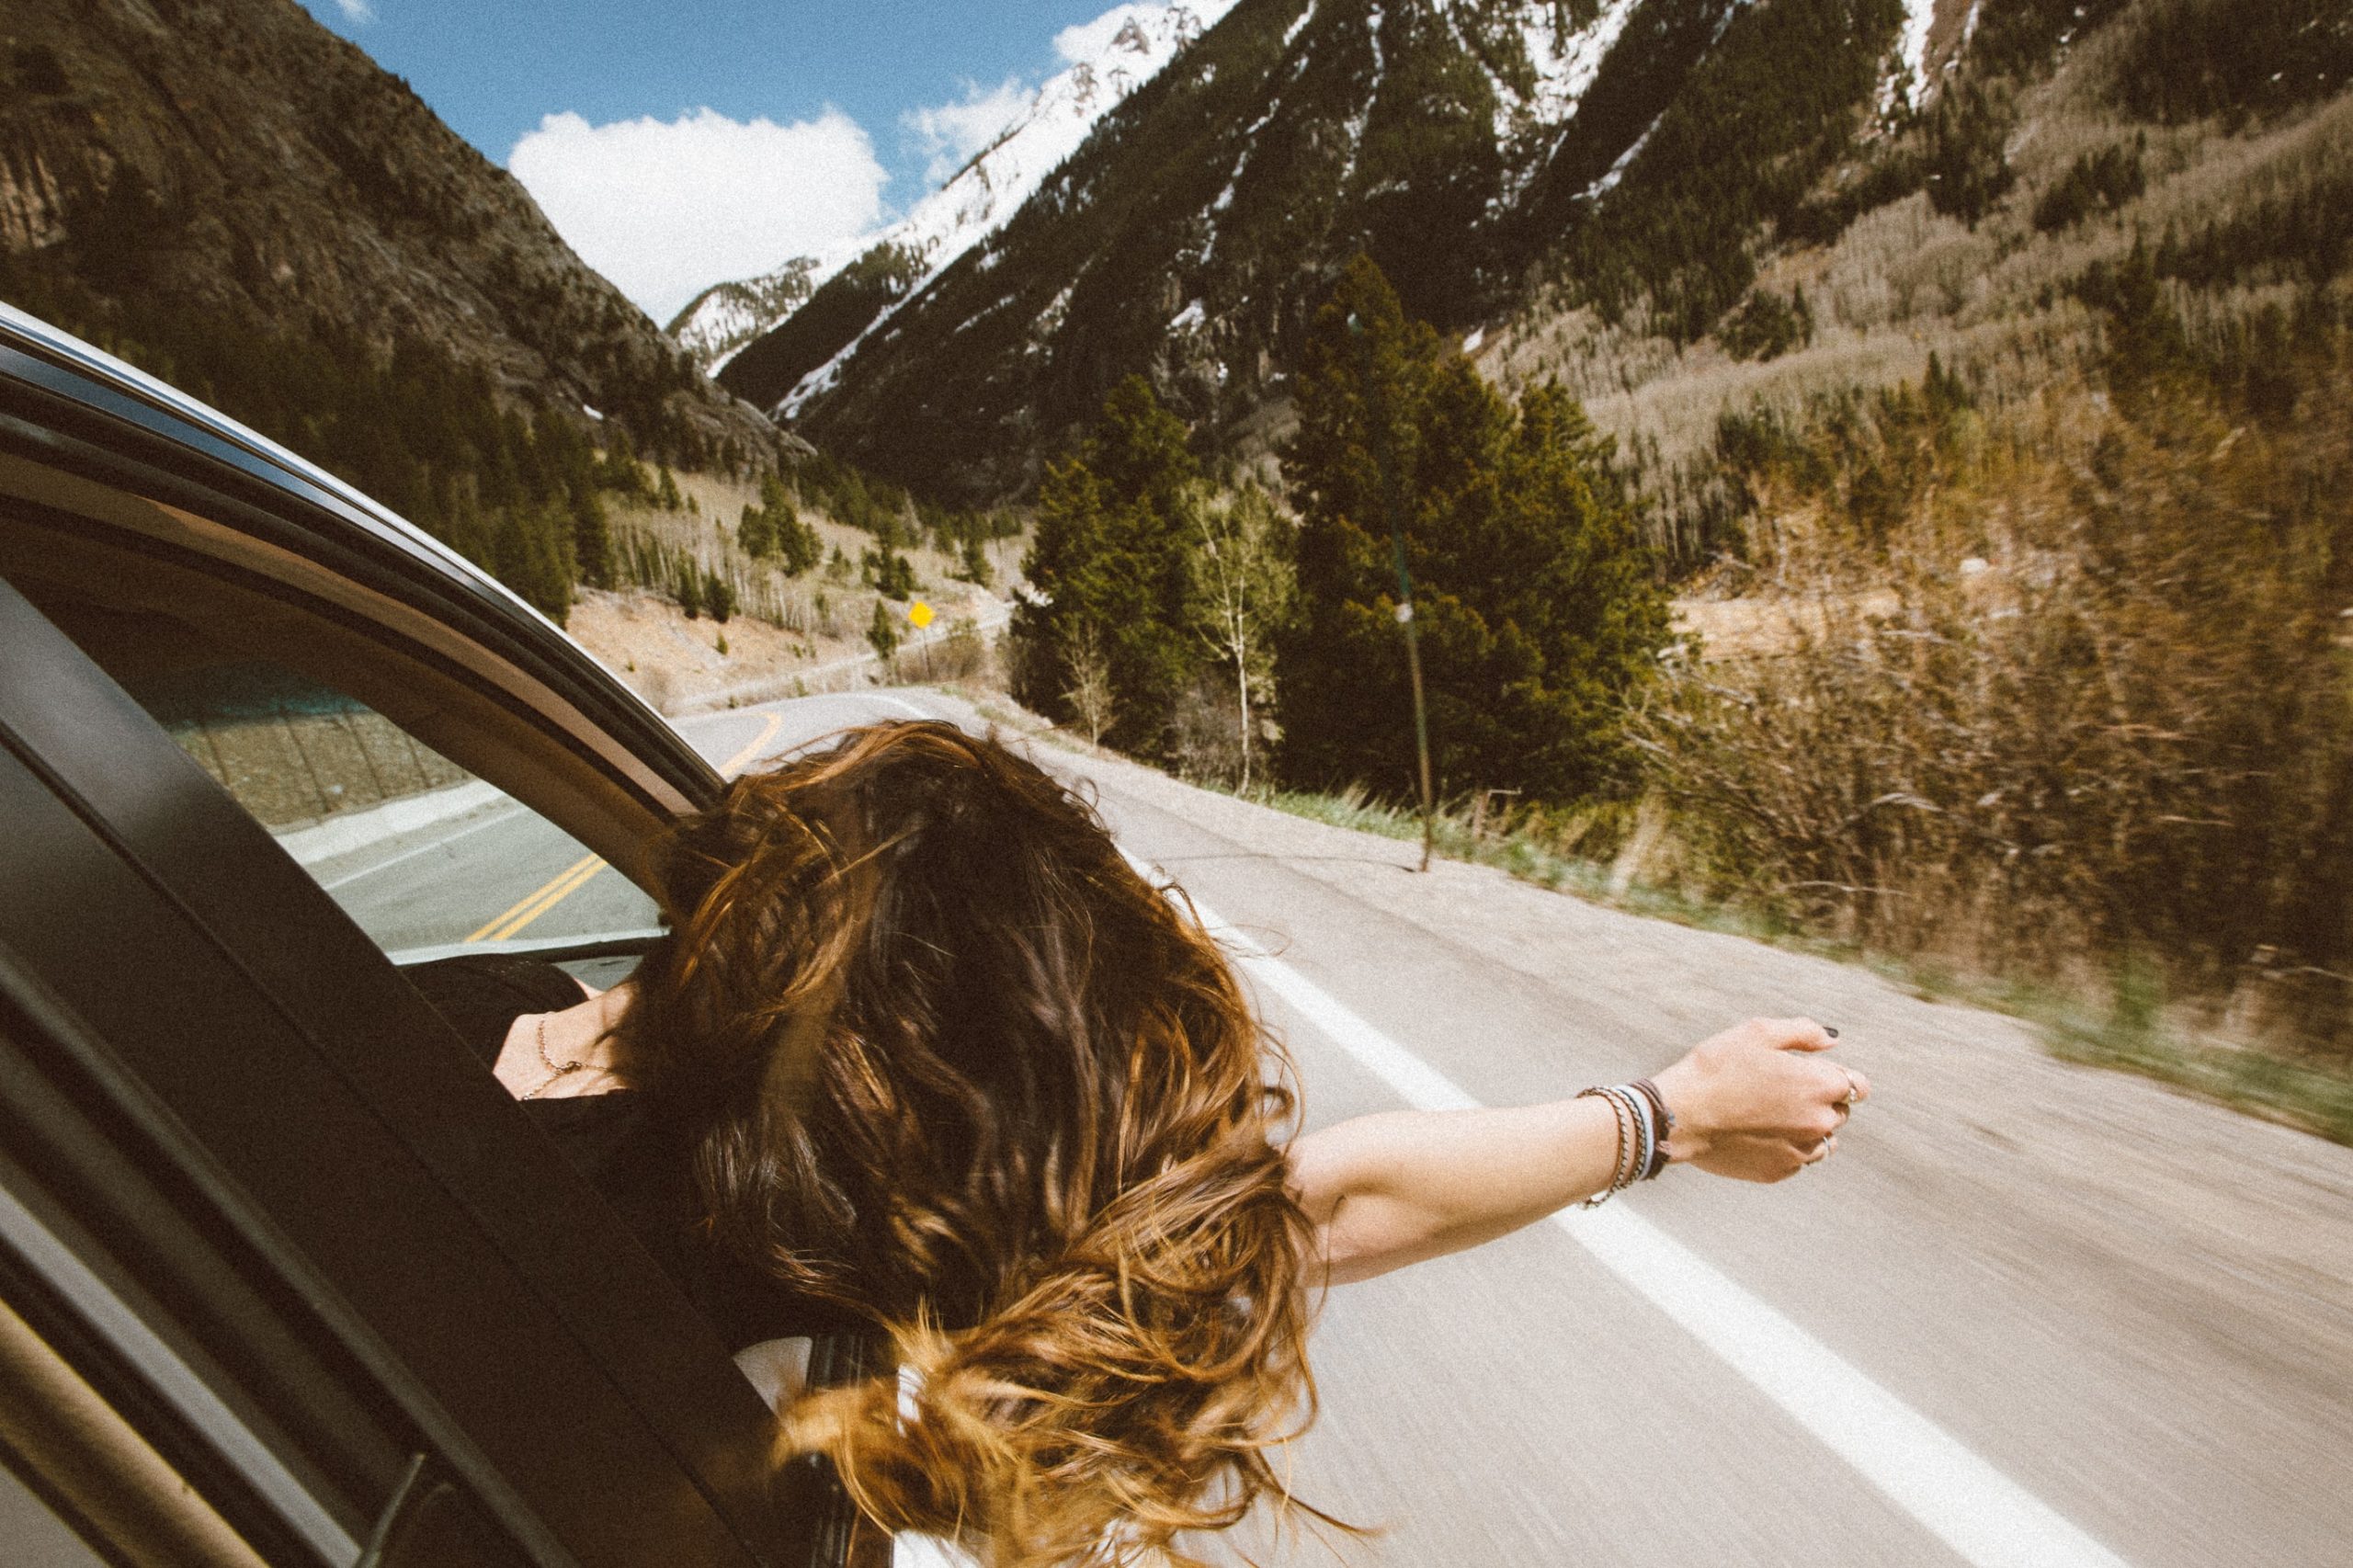 How to prepare your car for a road trip